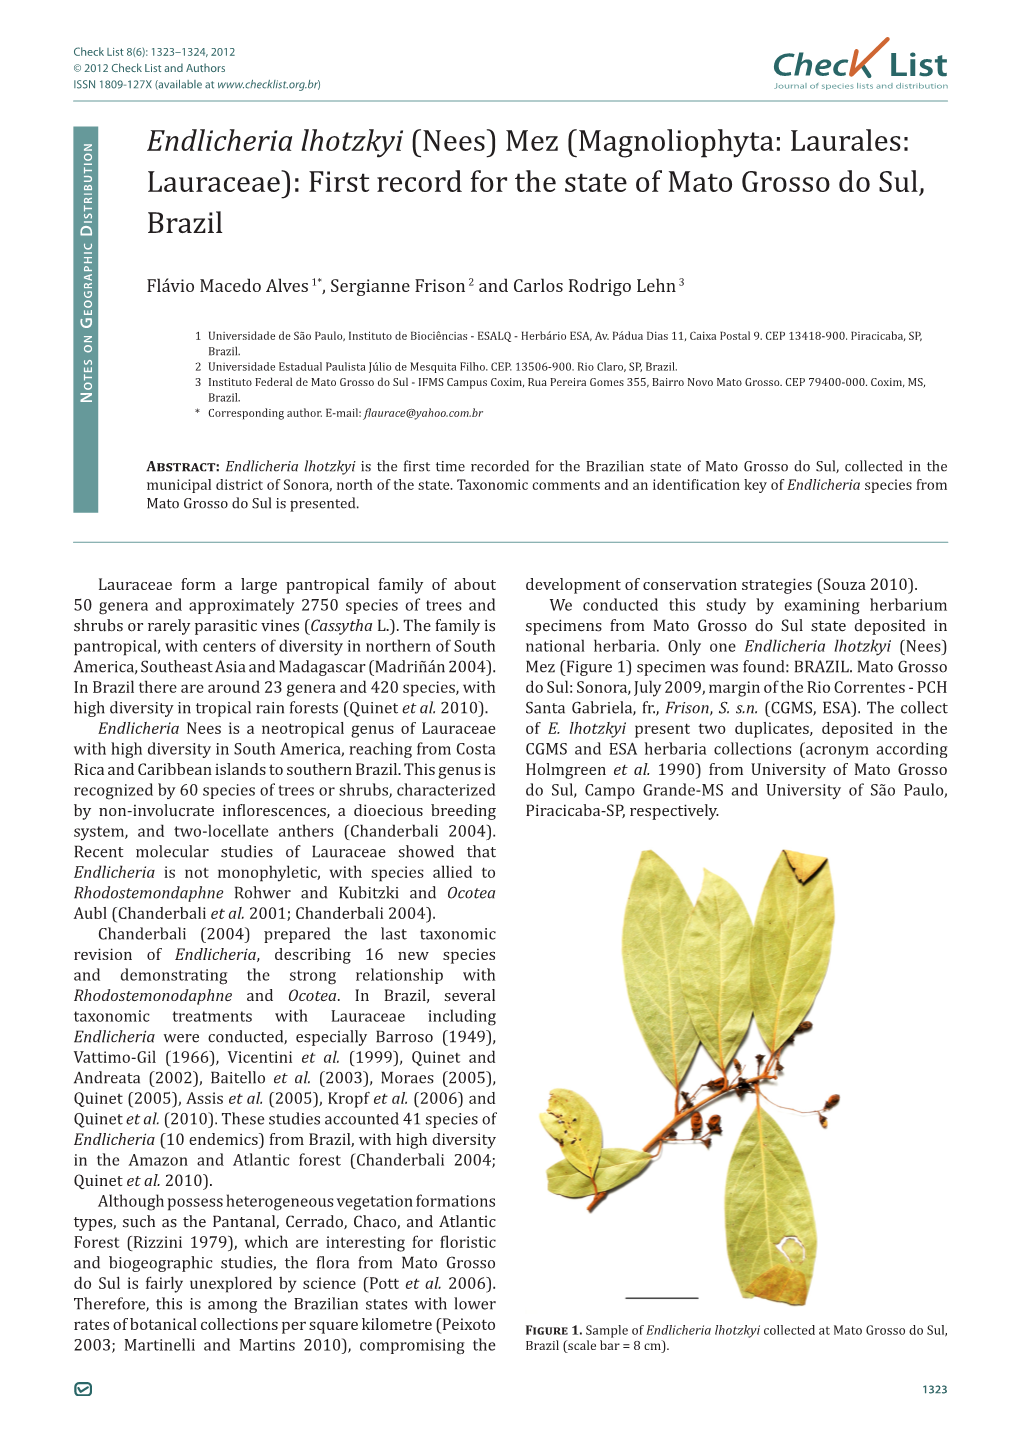 Endlicheria Lhotzkyi (Nees) Mez (Magnoliophyta: Laurales: Lauraceae): First Record for the State of Mato Grosso Do Sul